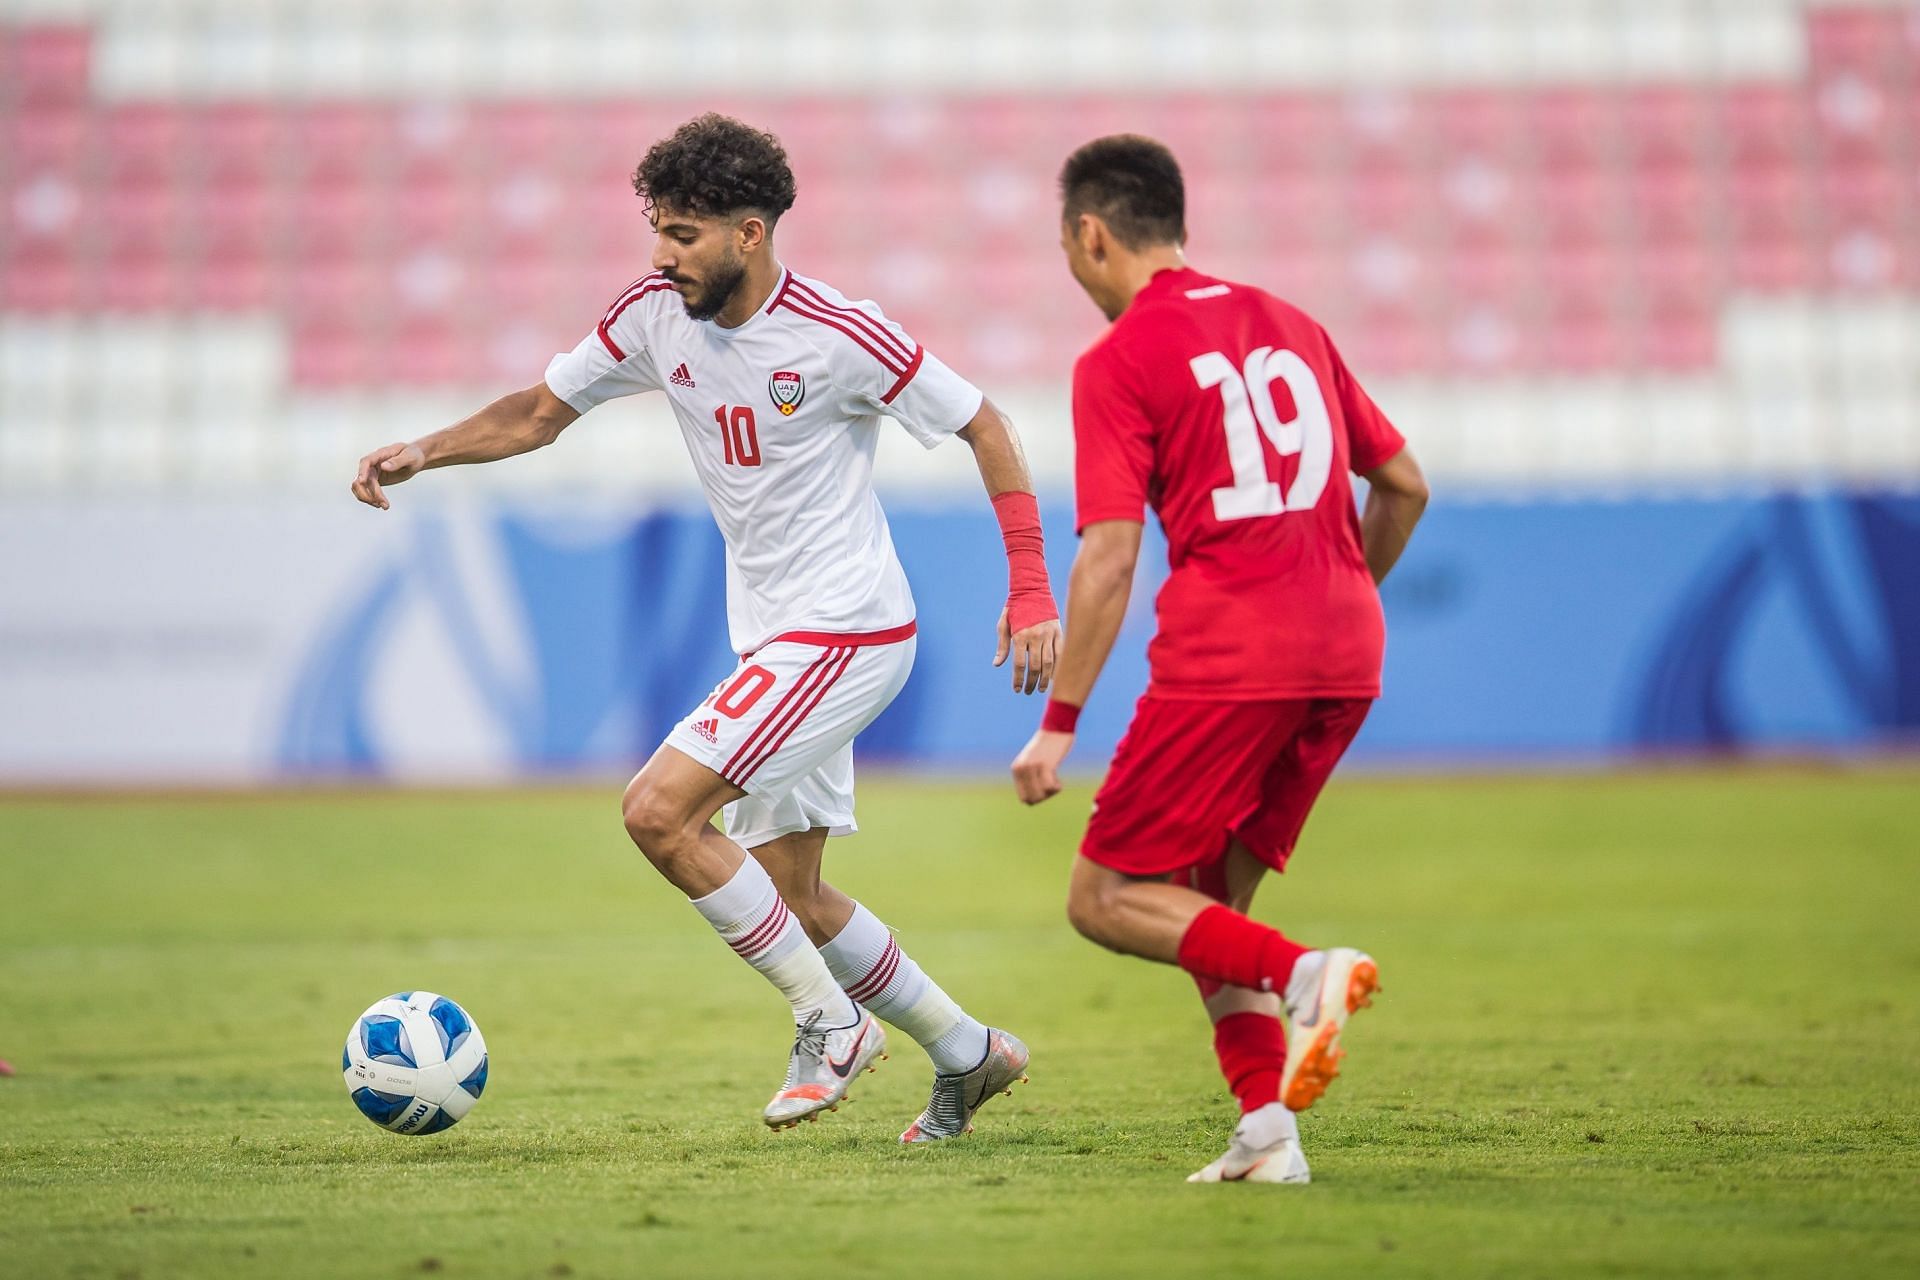 Khalid Al-Balochi (in white) scored the only goal for UAE in their 1-2 loss to Kyrgyzstan. (Image - @UAEFNT)